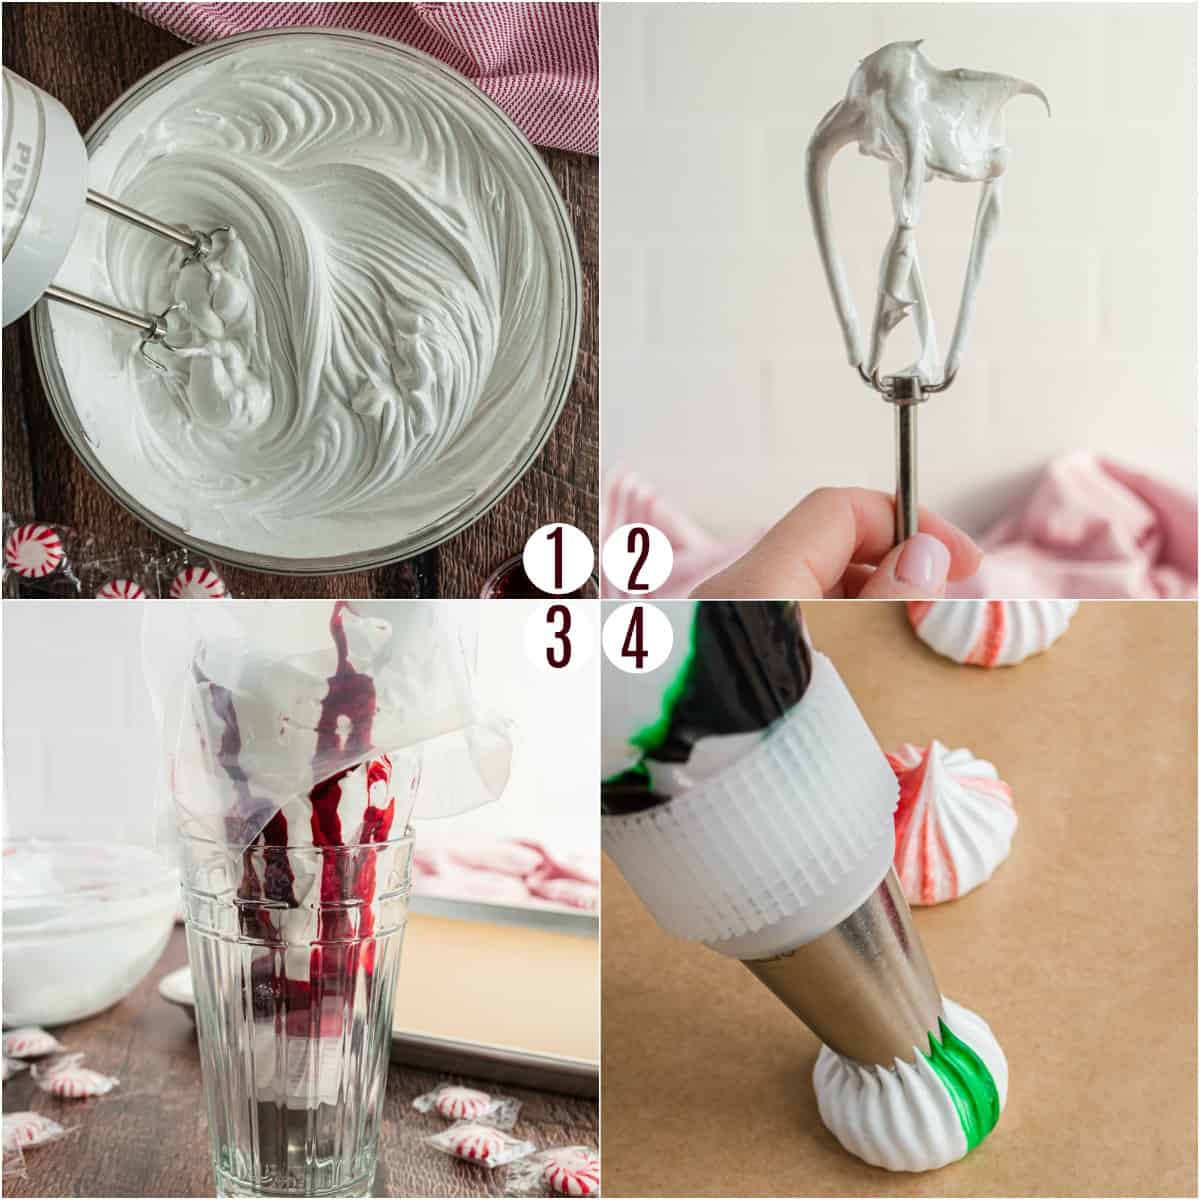 Step by Step photos showing how to make mint meringues.